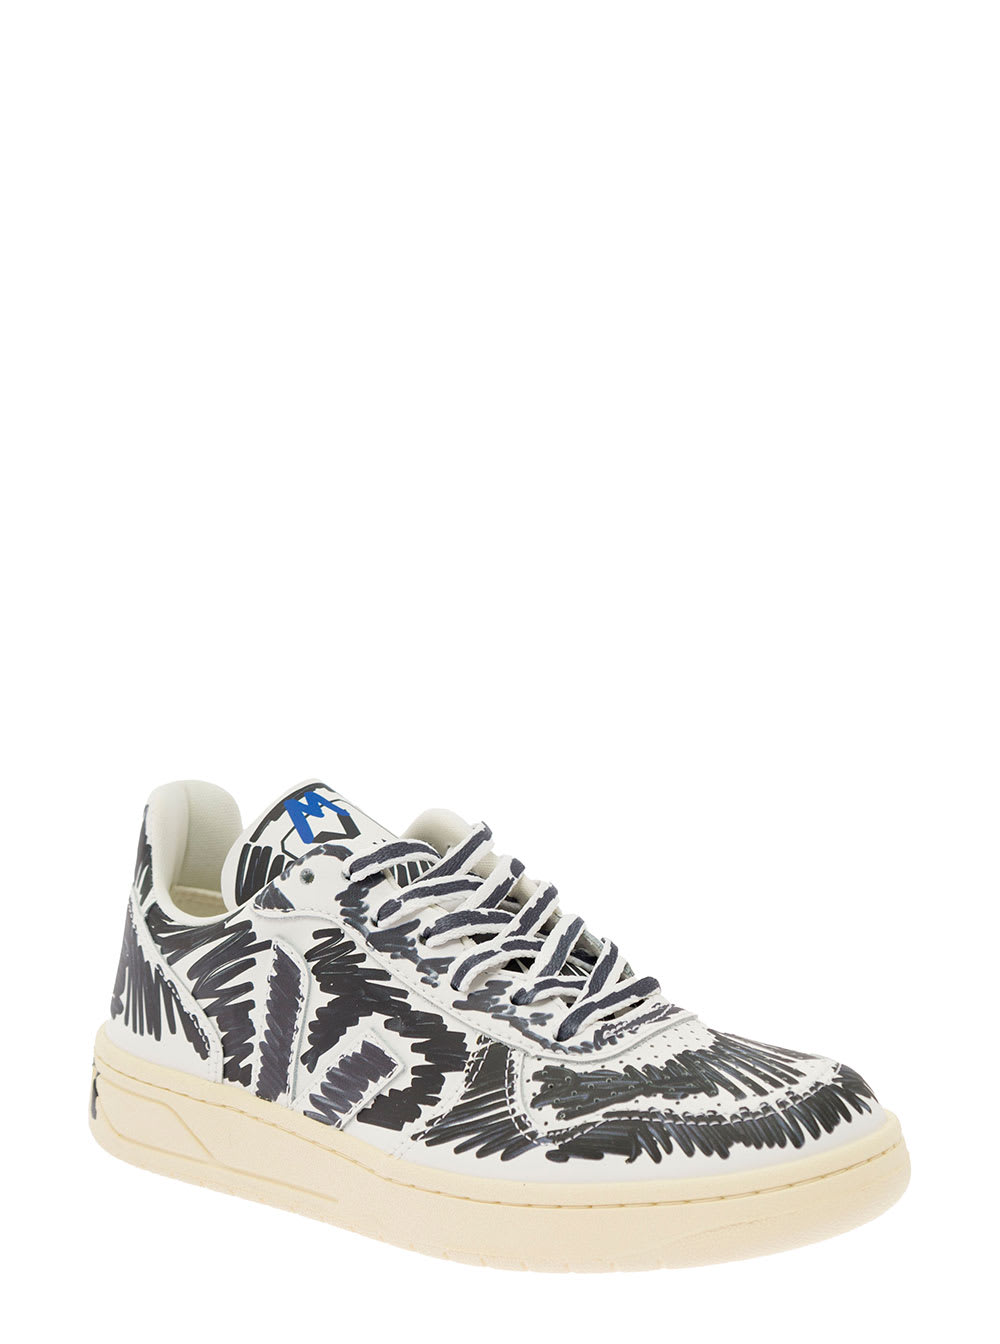 Veja X Marni Womens Black And White Leather Sneakers